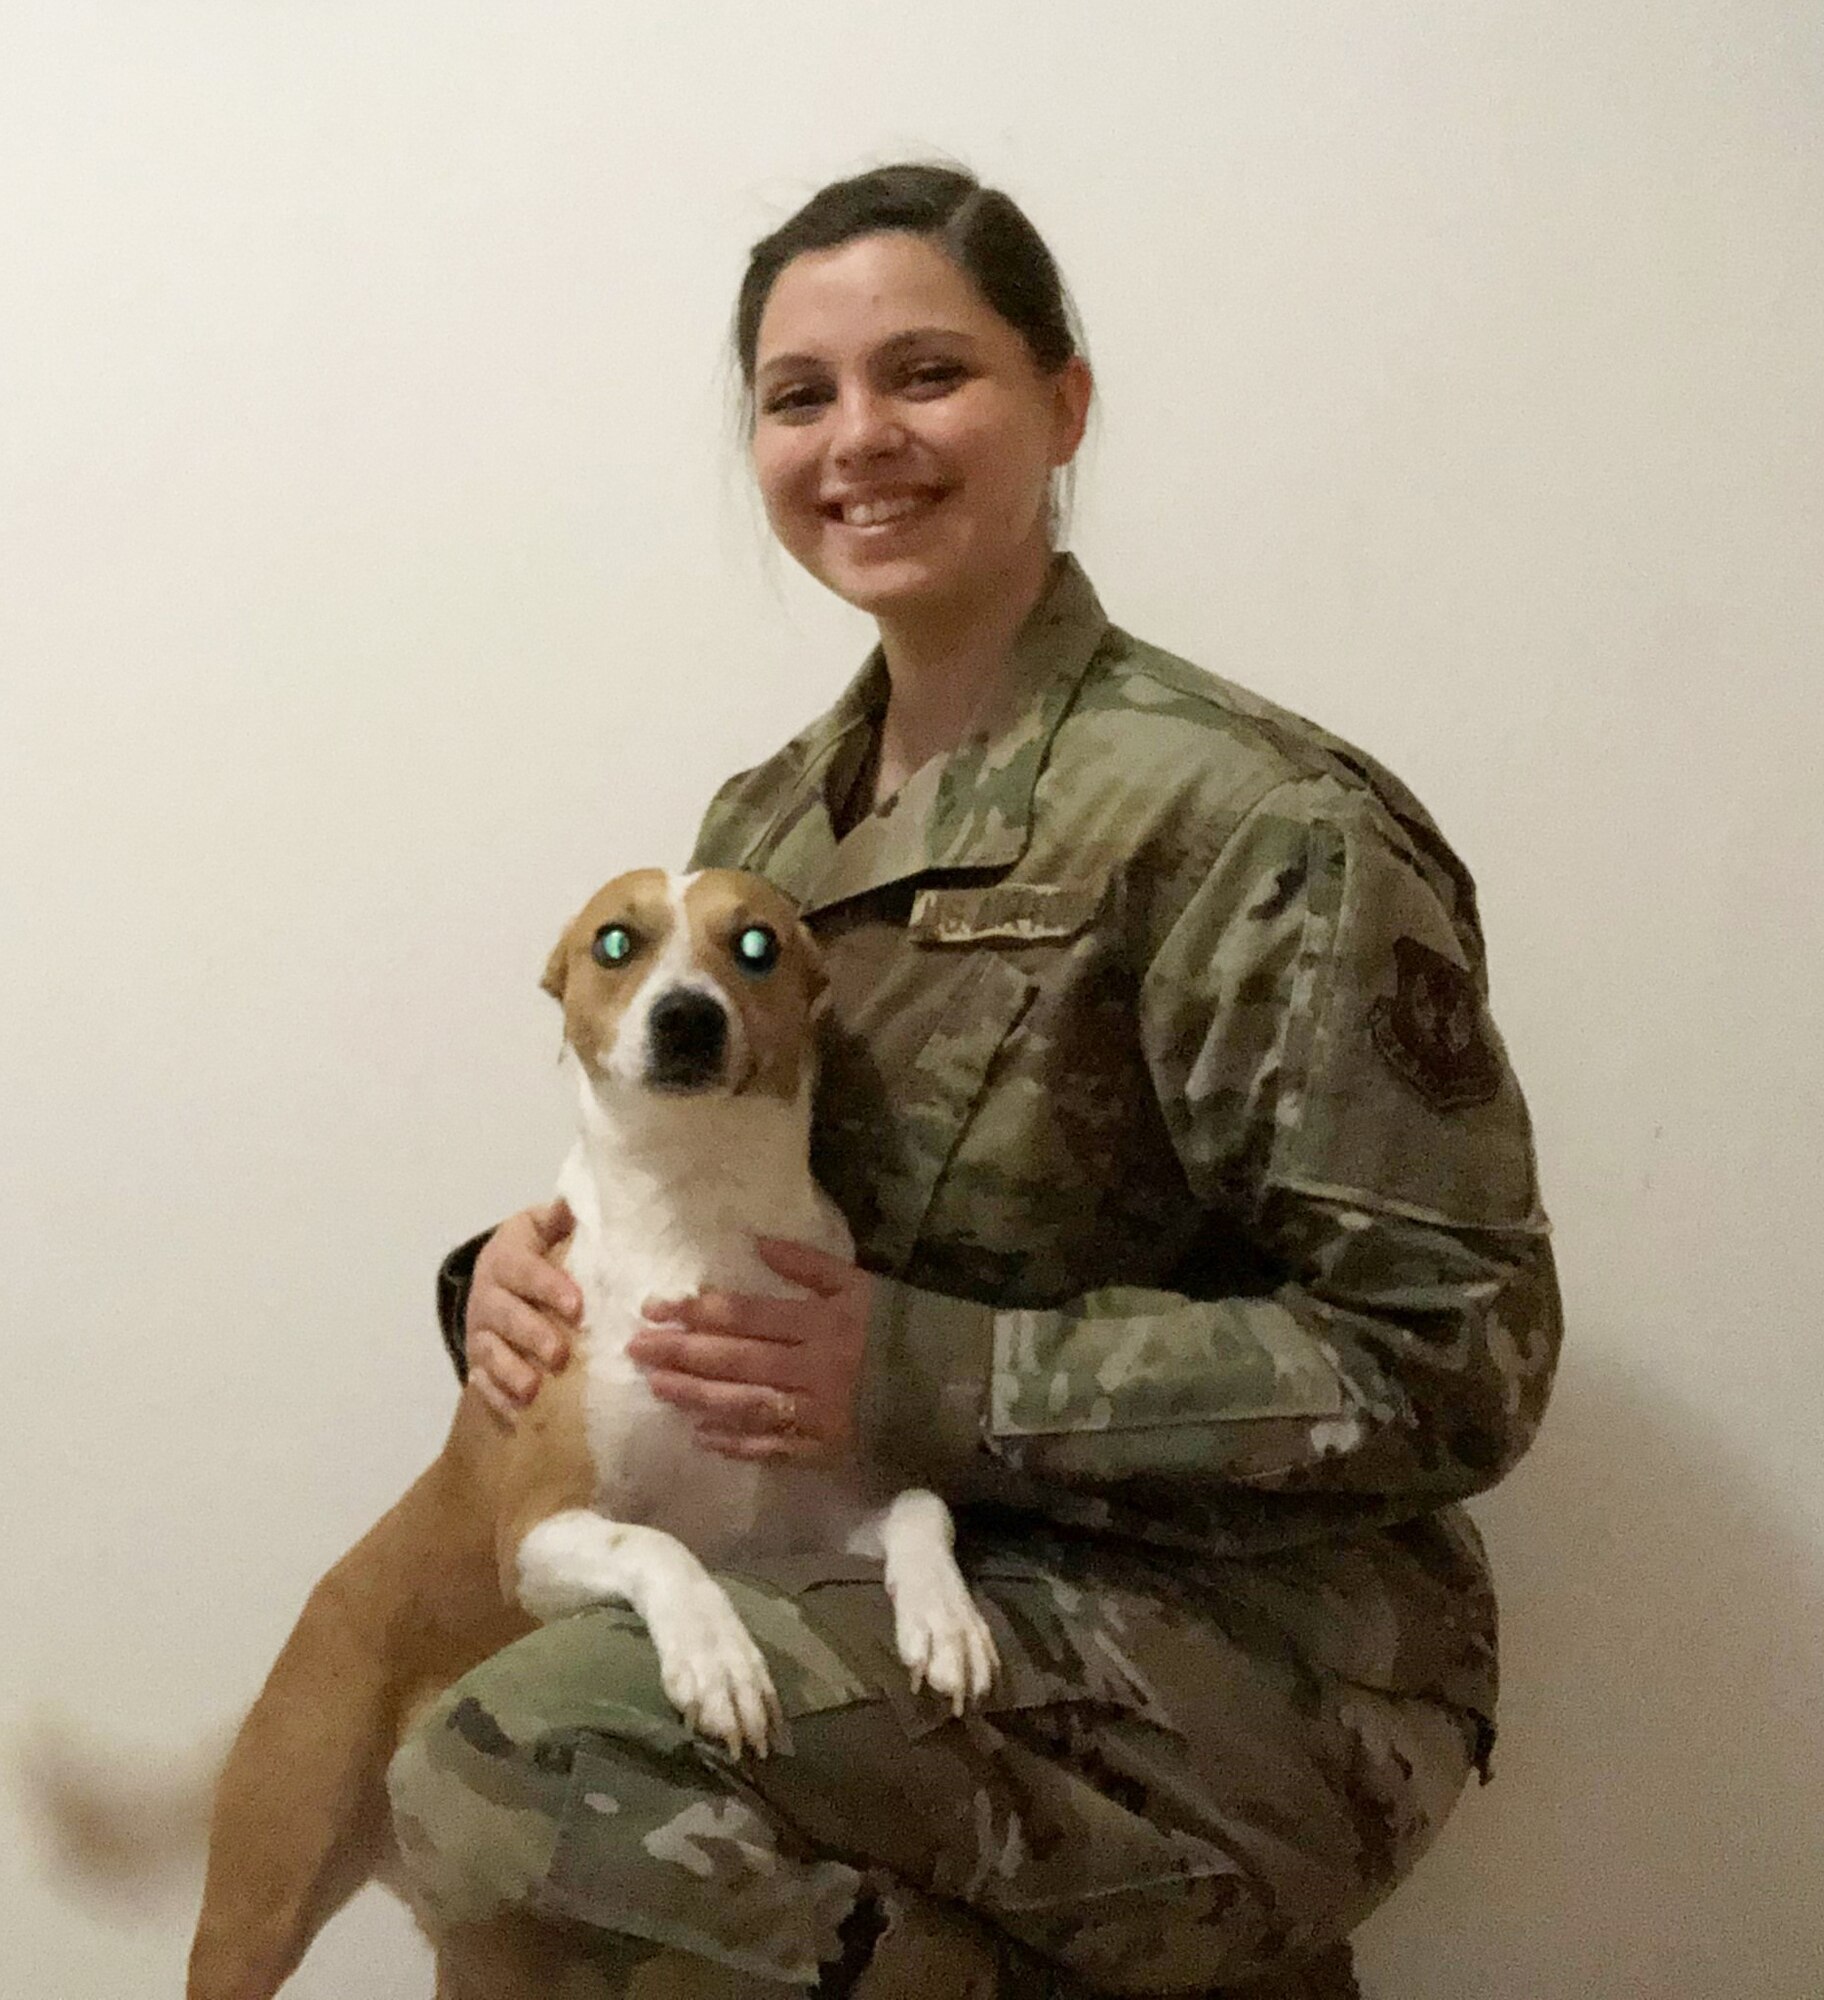 Female Airman poses with her dog.